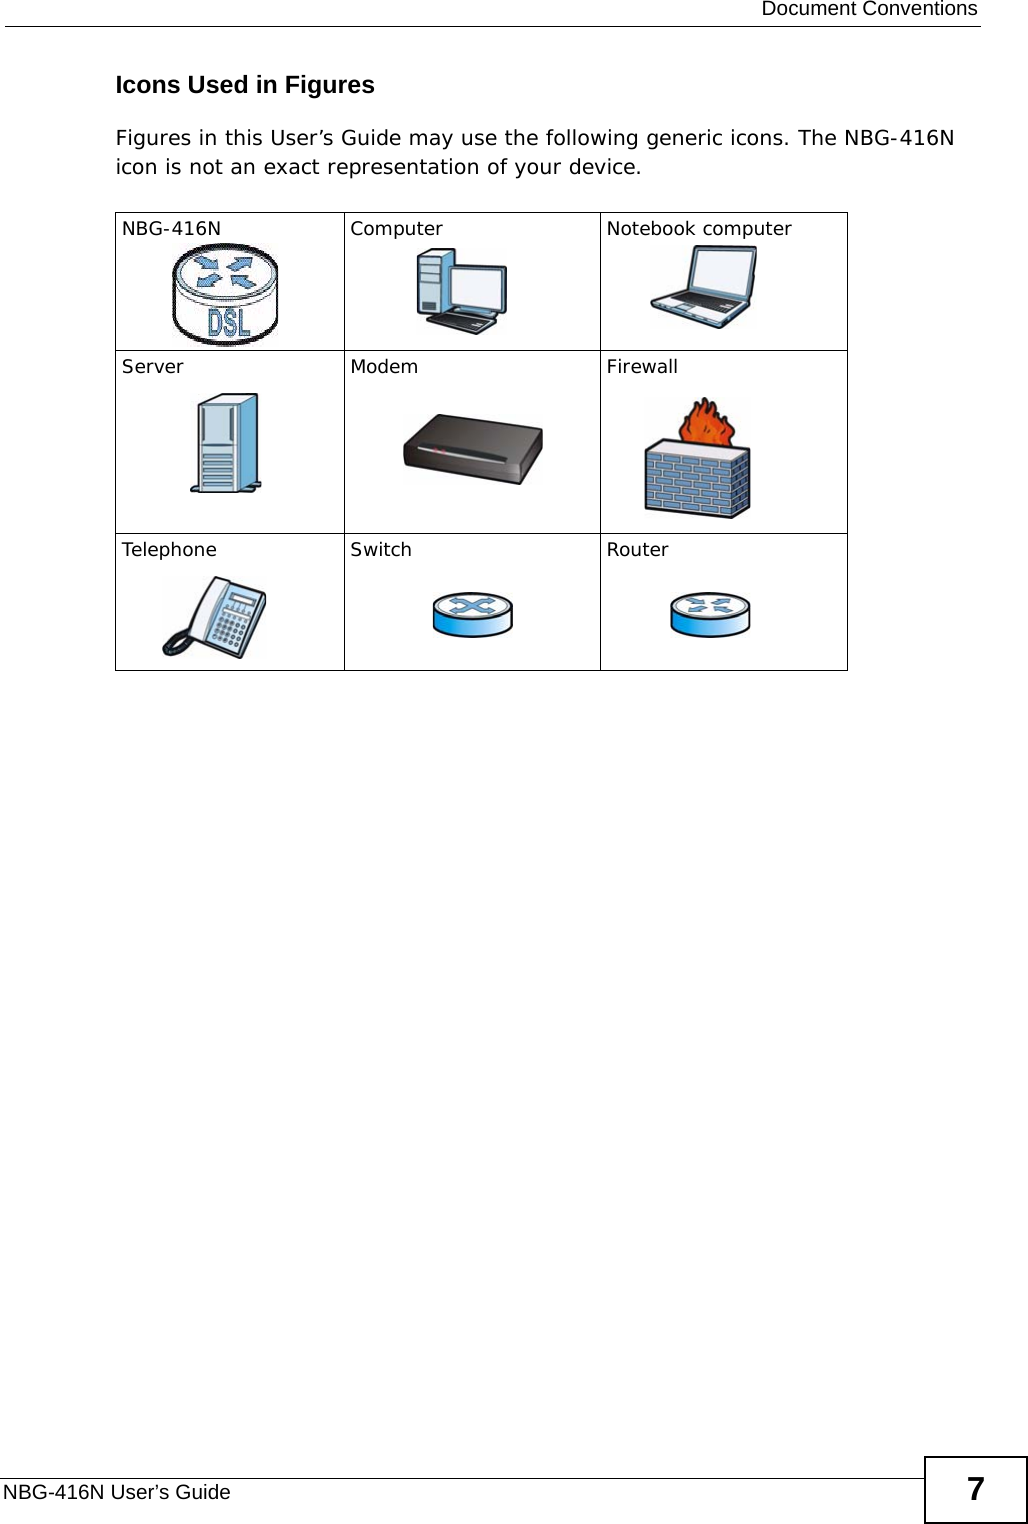  Document ConventionsNBG-416N User’s Guide 7Icons Used in FiguresFigures in this User’s Guide may use the following generic icons. The NBG-416N icon is not an exact representation of your device.NBG-416N Computer Notebook computerServer Modem FirewallTelephone Switch Router